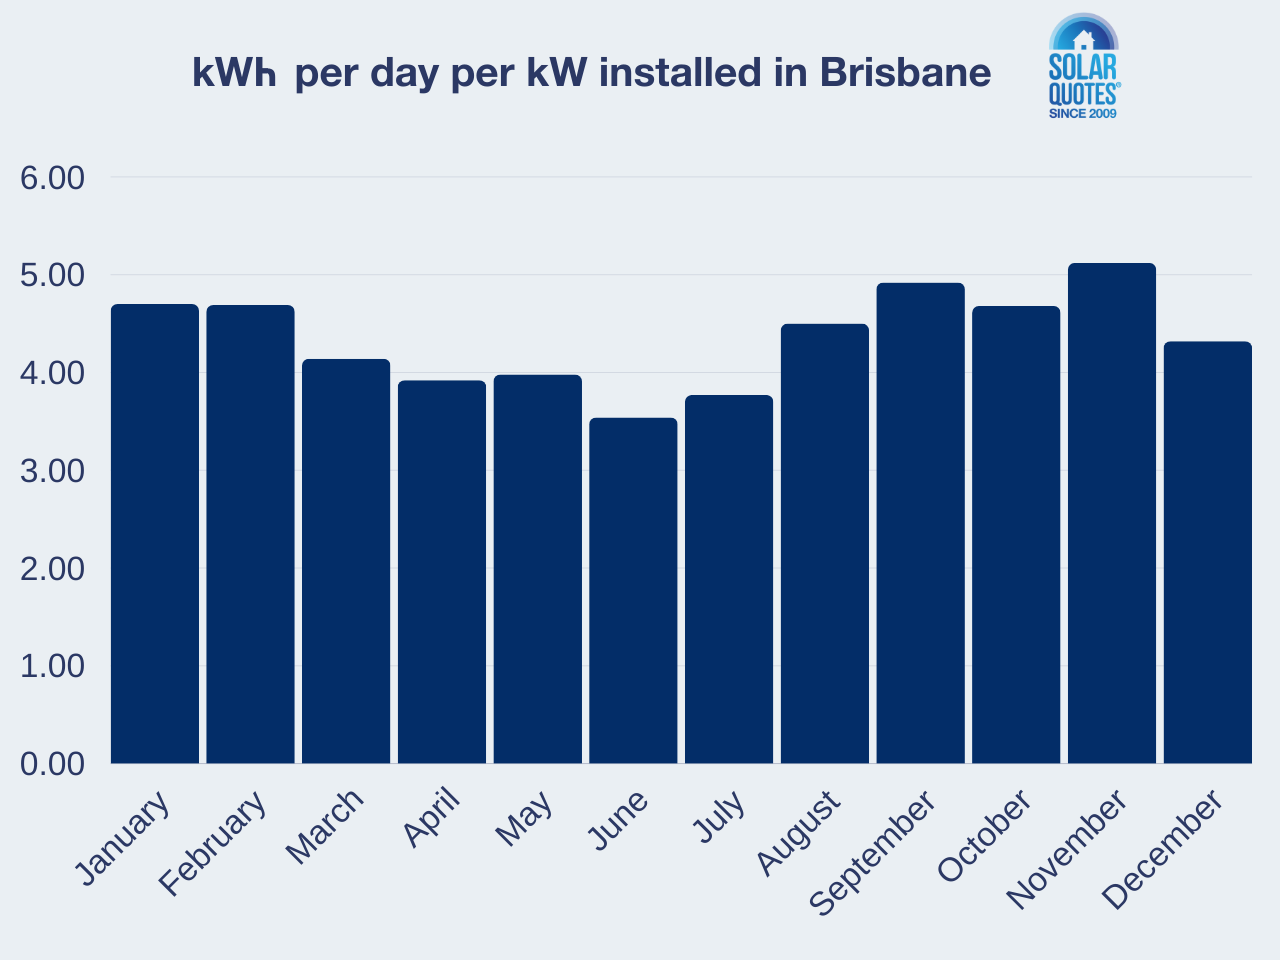 The amount of kWh produced per day per kW installed in Brisbane